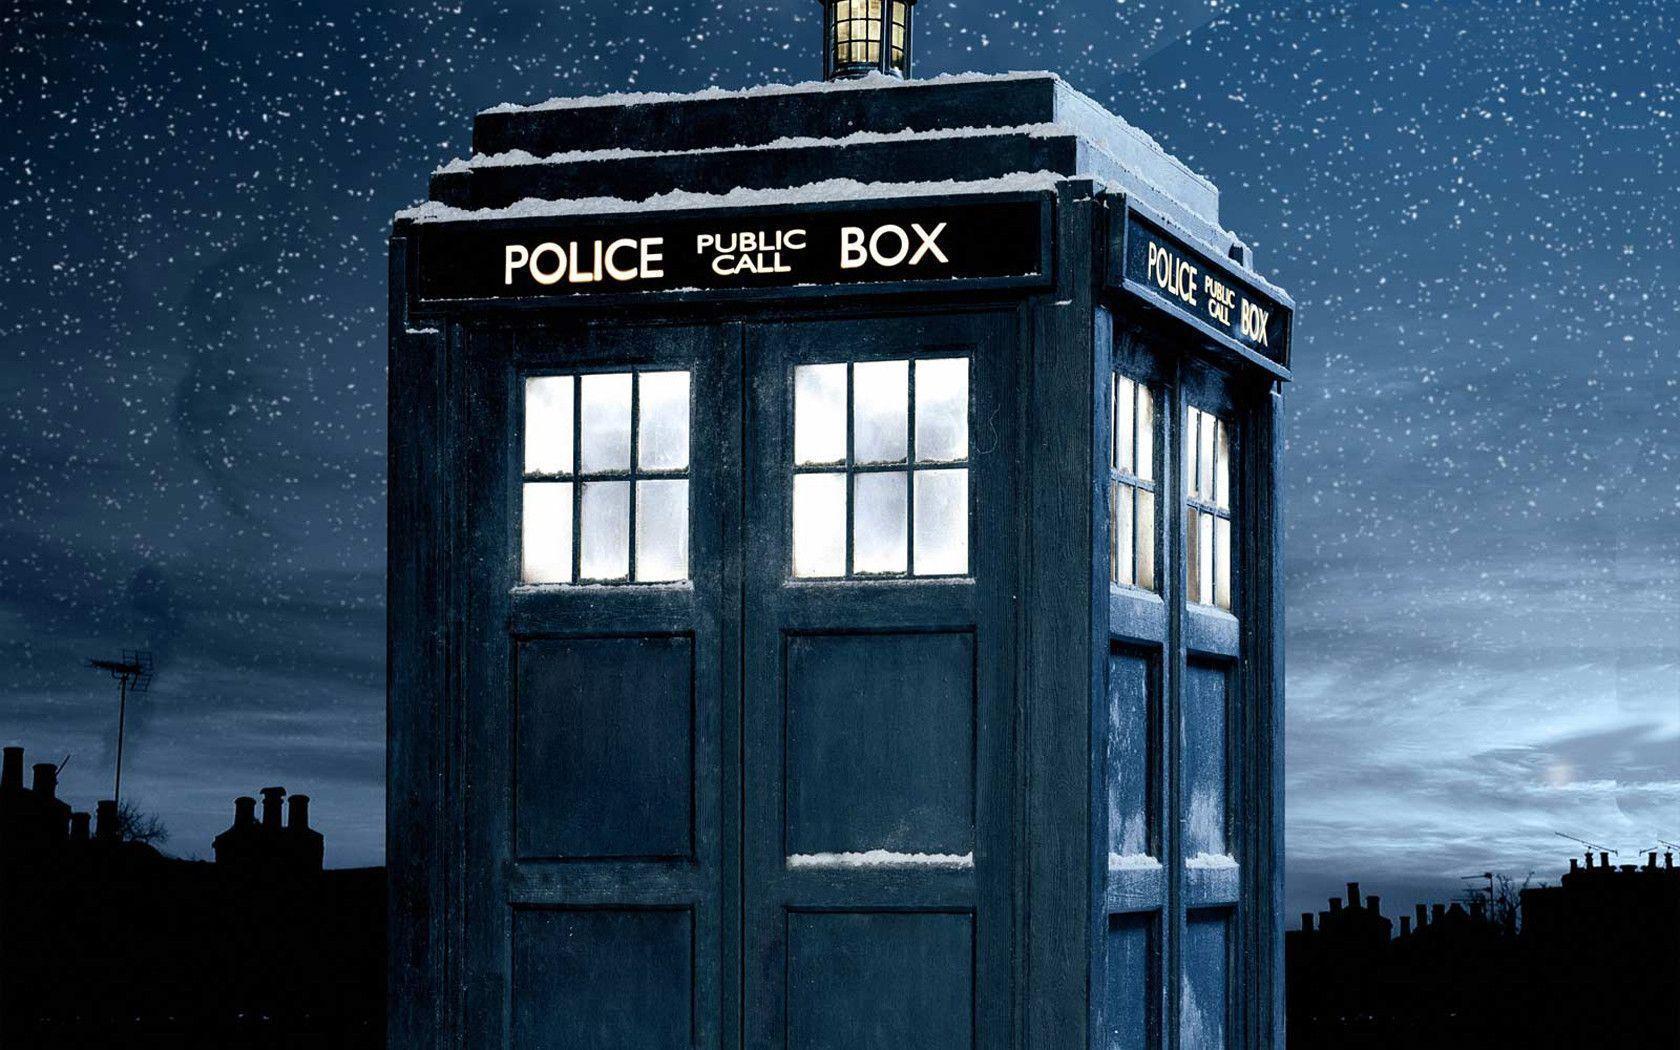 AmazingPict.com. Doctor Who Android Wallpaper